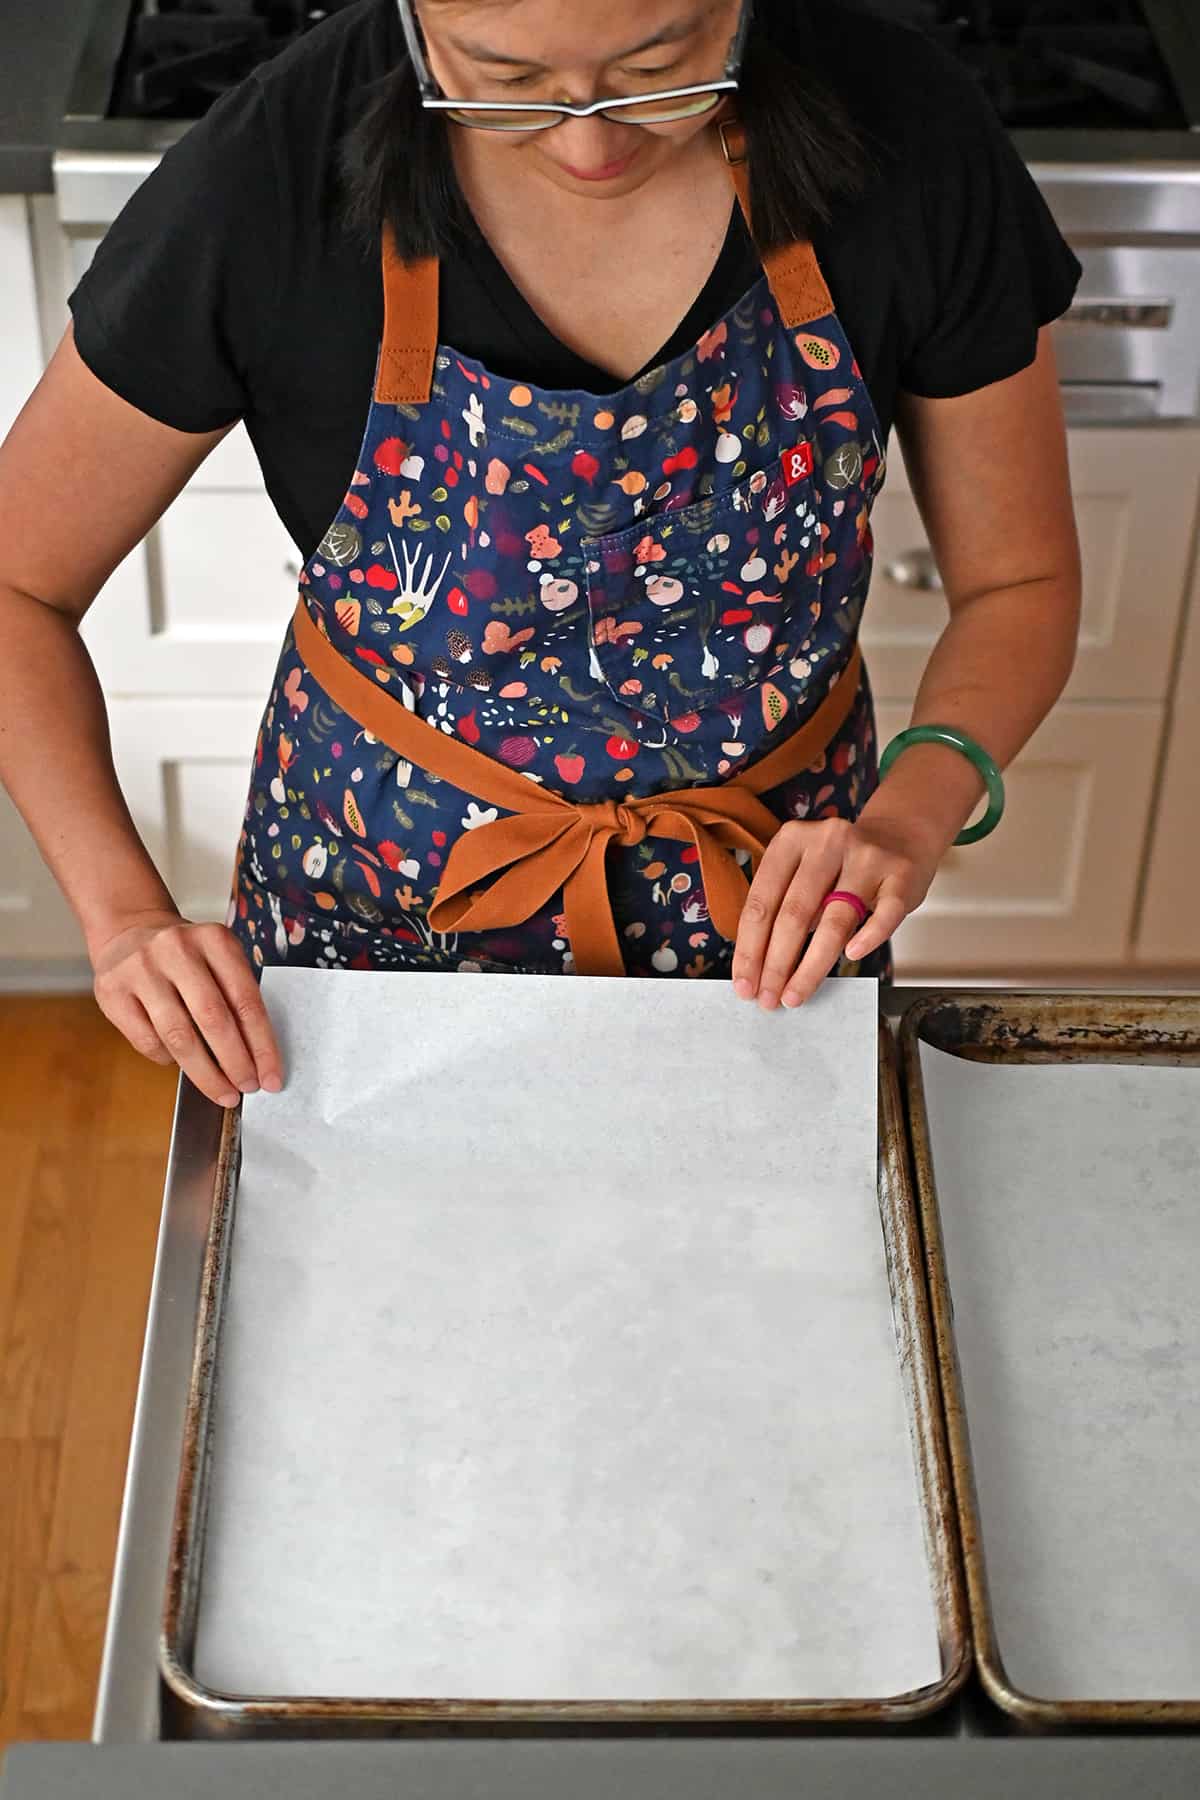 Lining two rimmed baking pans with parchment paper.